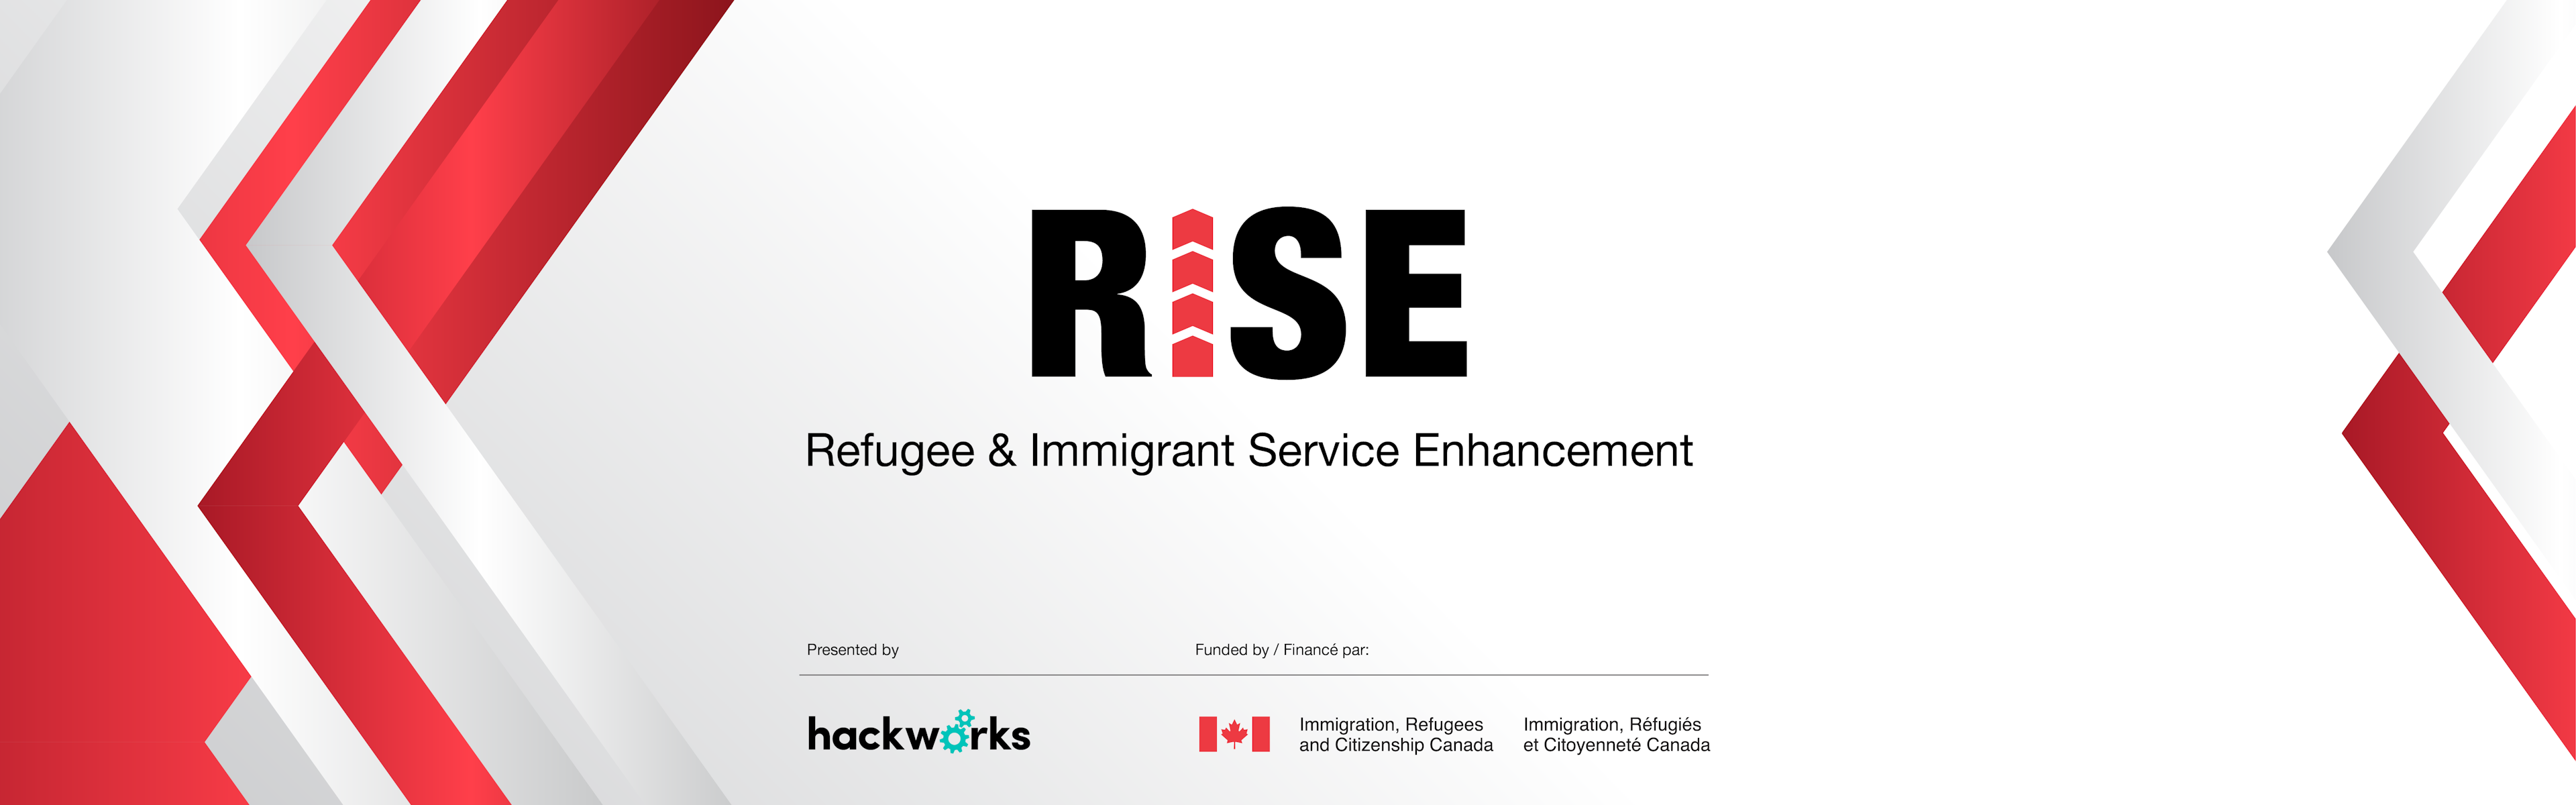 RISE: Refugee & Immigrant Service Enhancement